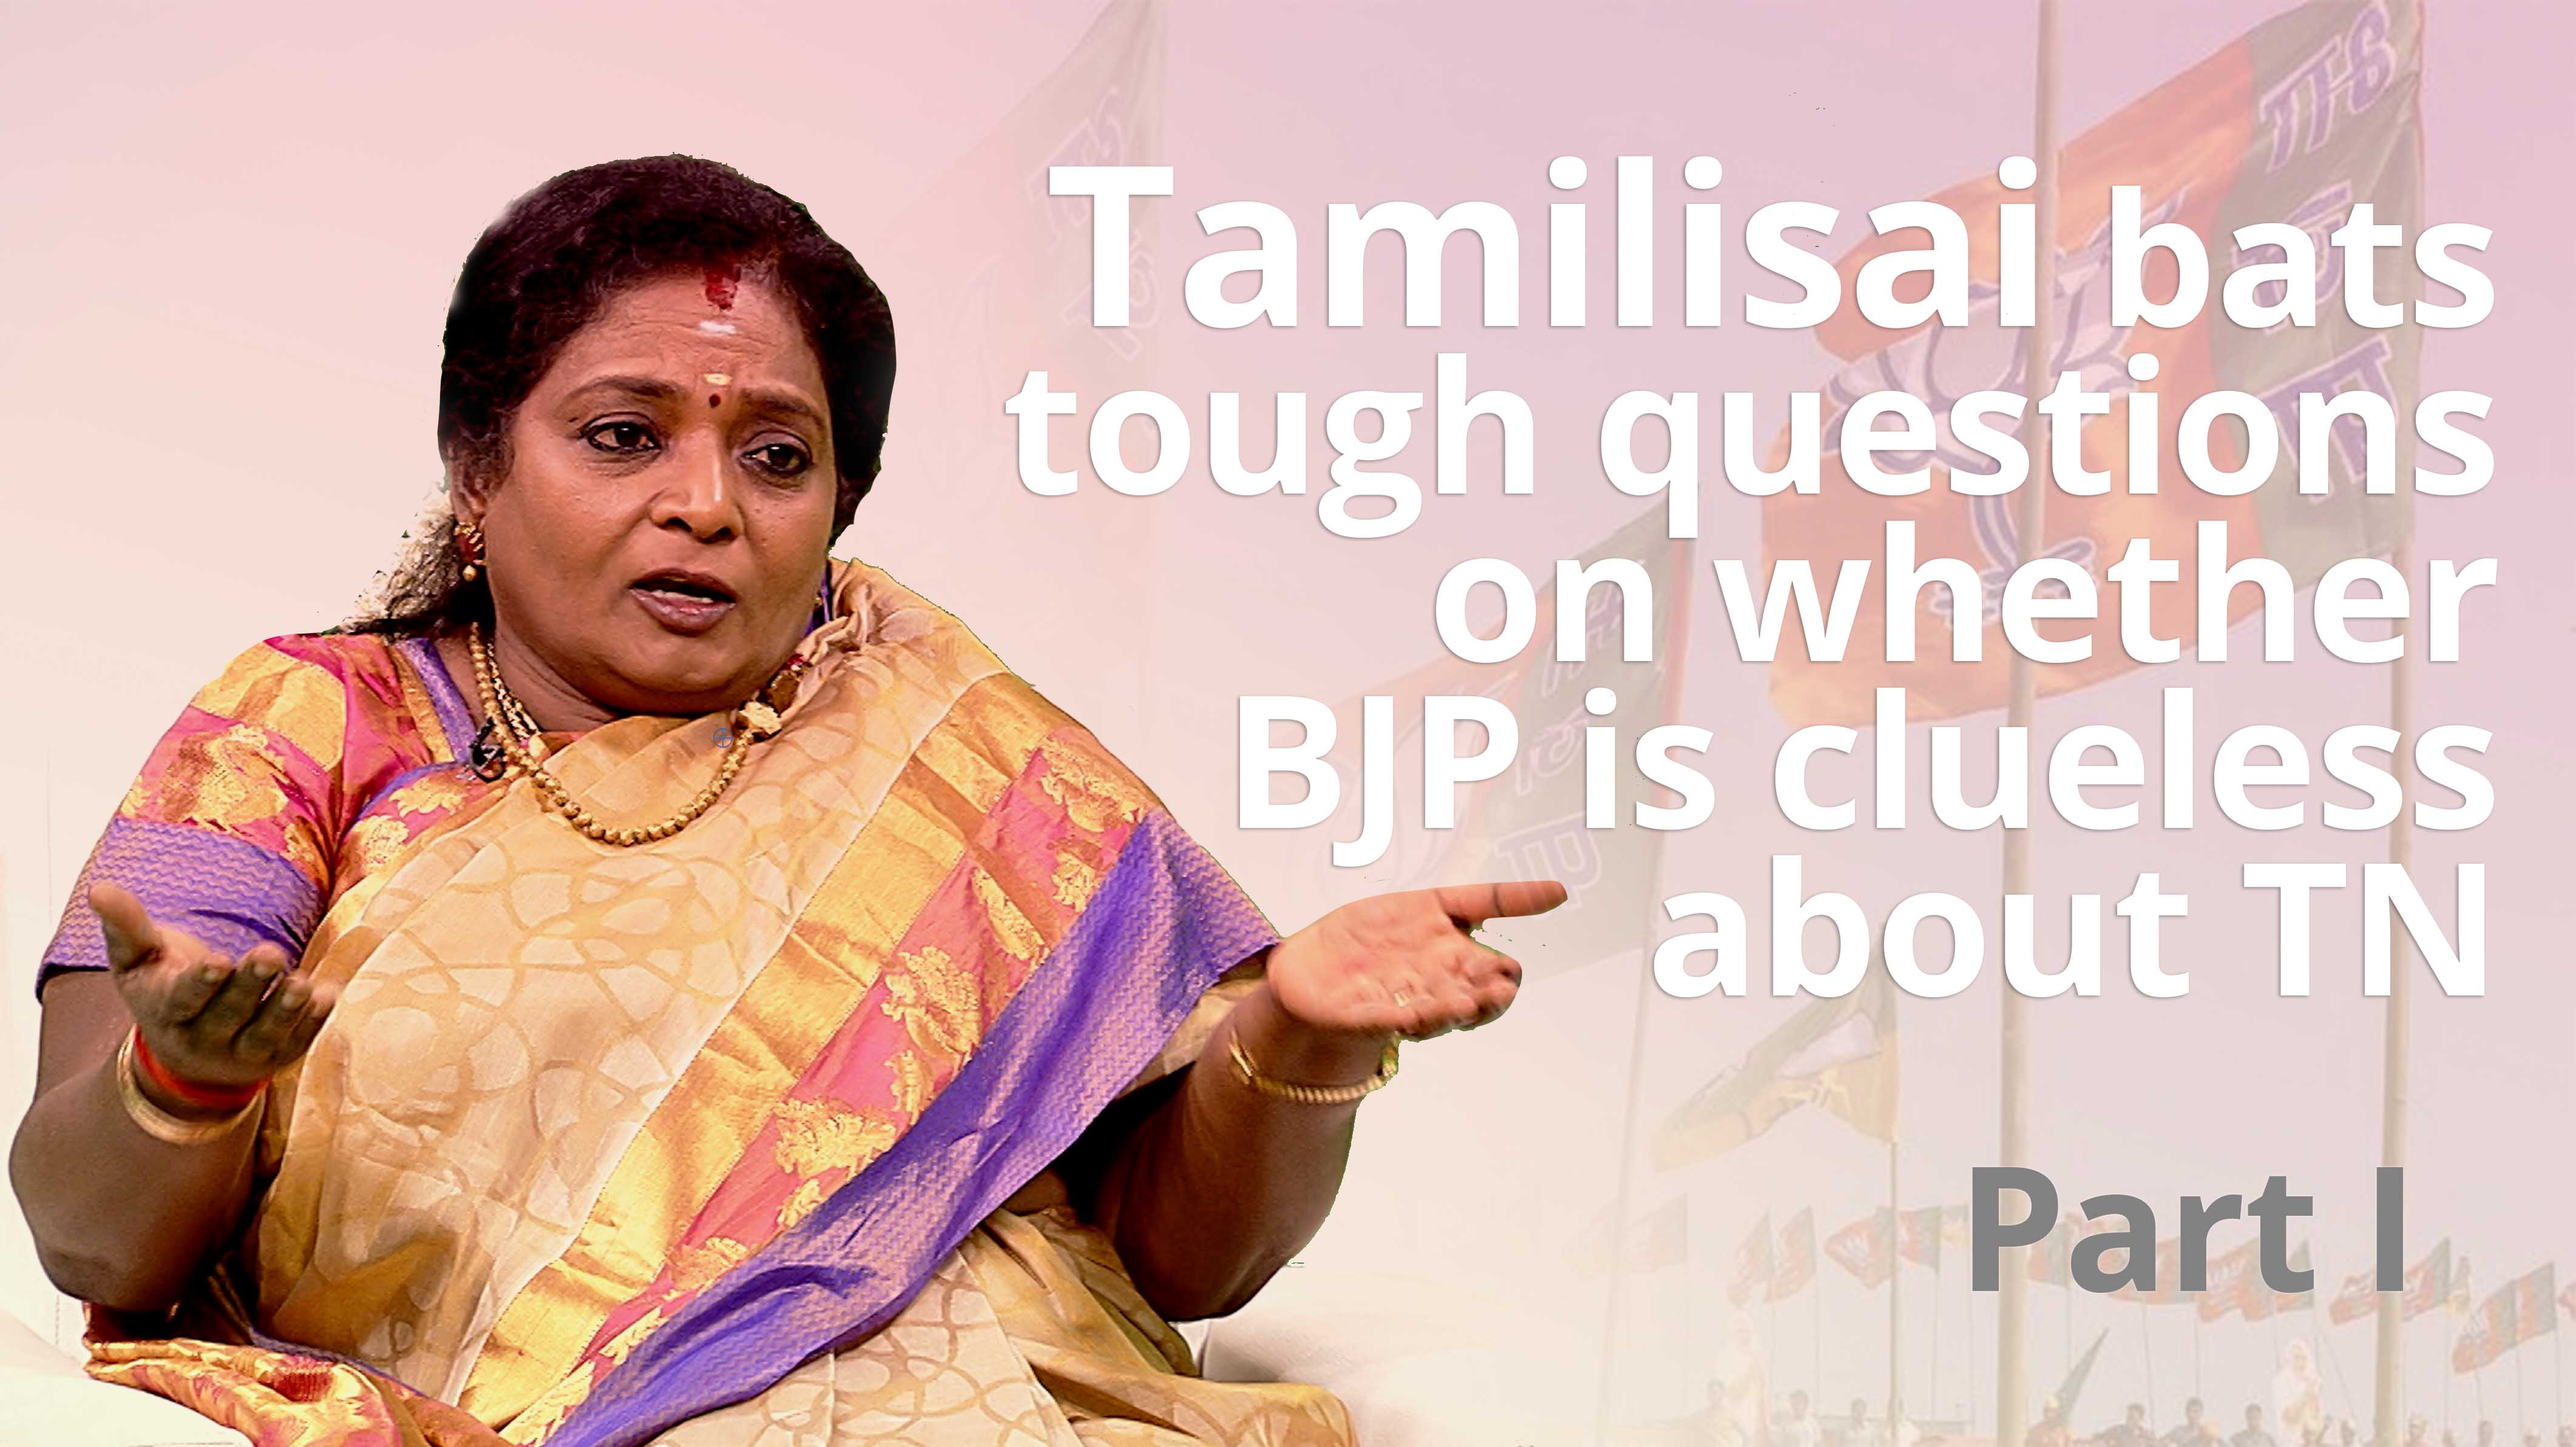 Part 1 | Tamilisai bats tough questions on whether BJP is clueless about TN